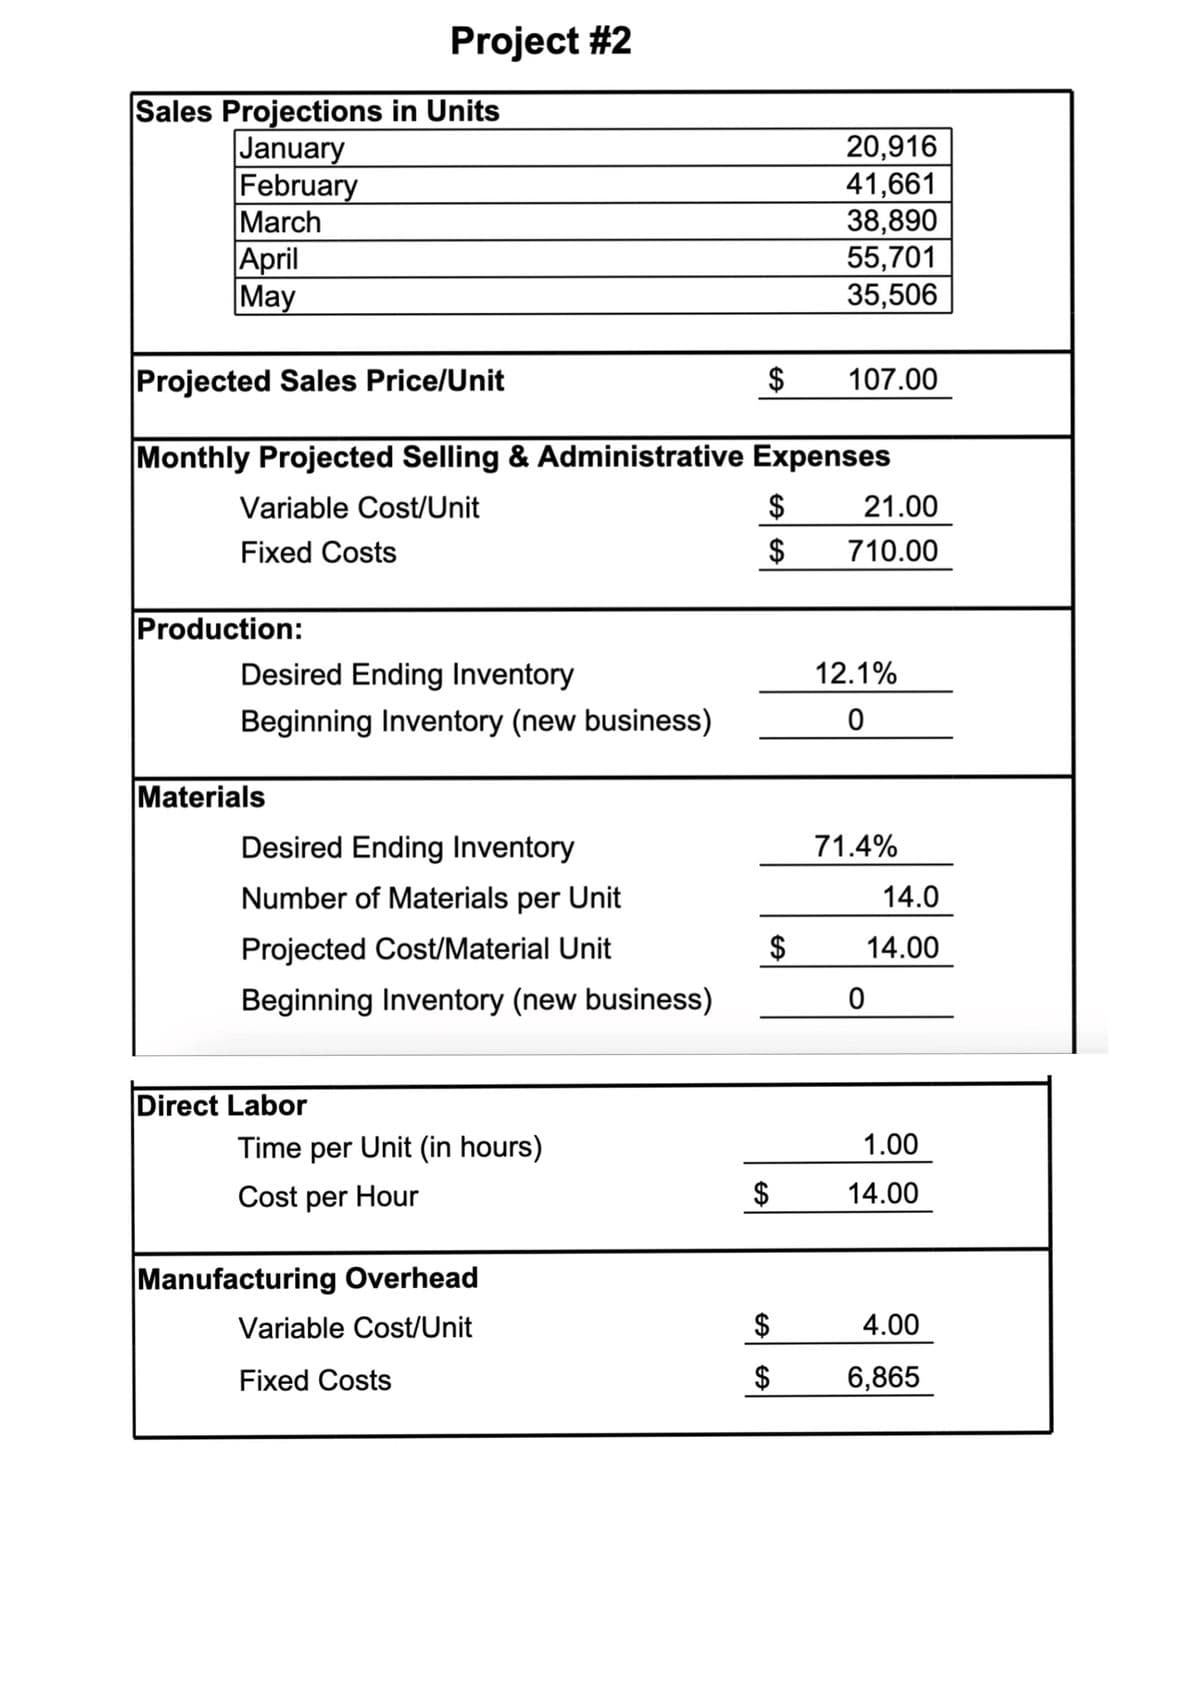 Sales Projections in Units
January
February
March
April
May
Production:
Project #2
Projected Sales Price/Unit
Monthly Projected Selling & Administrative Expenses
Variable Cost/Unit
Fixed Costs
Desired Ending Inventory
Beginning Inventory (new business)
Materials
Desired Ending Inventory
Number of Materials per Unit
Projected Cost/Material Unit
Beginning Inventory (new business)
Direct Labor
Time per Unit (in hours)
Cost per Hour
$
Manufacturing Overhead
Variable Cost/Unit
Fixed Costs
$
$
$
$
20,916
41,661
38,890
55,701
35,506
$
$
107.00
21.00
710.00
12.1%
0
71.4%
0
14.0
14.00
1.00
14.00
4.00
6,865